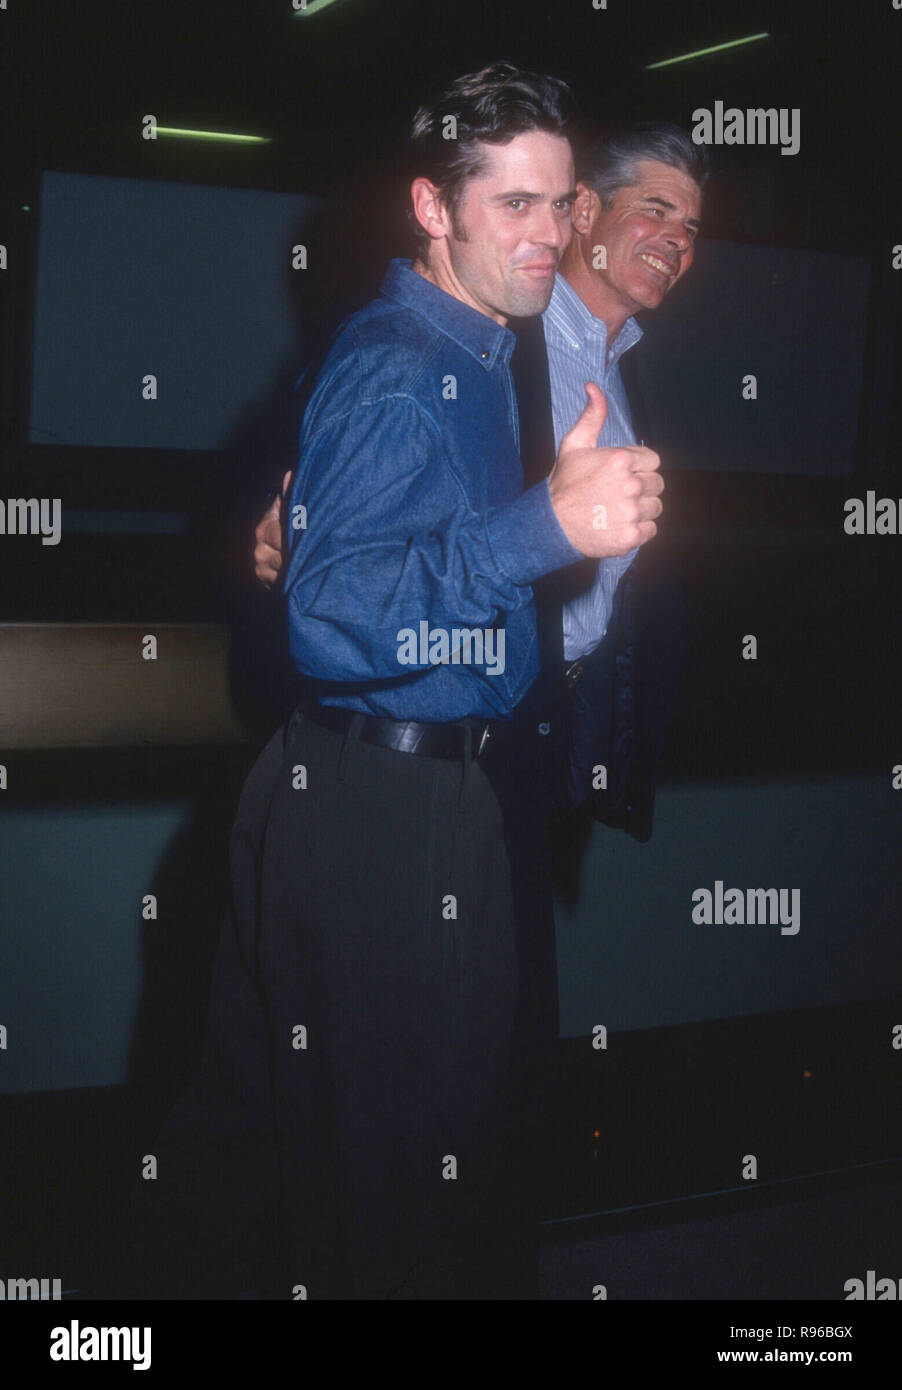 WEST HOLLYWOOD, CA - MAY 11: Actor C. Thomas Howell and father Chris Howell attend the premiere of 'American Heart' on May 11, 1993 at the Center Green Theater in West Hollywood, California. Photo by Barry King/Alamy Stock Photo Stock Photo